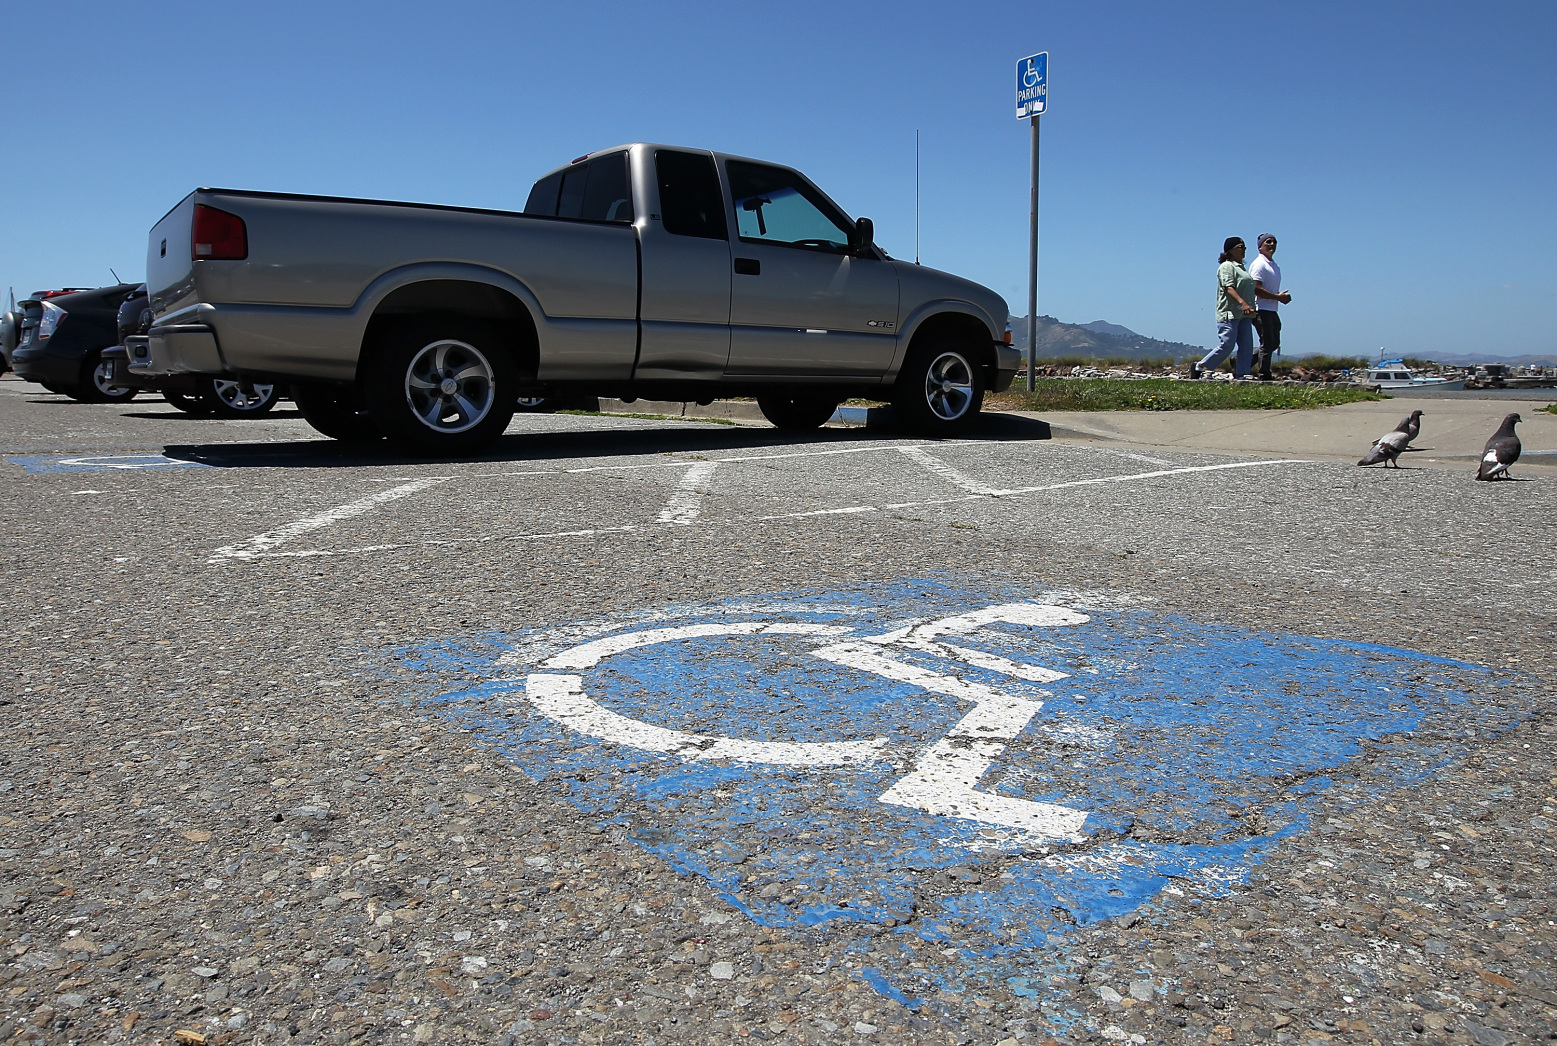 SAN FRANCISCO, CA - JULY 20: A truck is parked in a disabled parking spot on July 20, 2011 in San Francisco, California. The California DMV says that is has sent out nearly 60,000 disabled parking placards to dead people since the DMV only checks state death records every two years. The disabled parking placards allow handicapped motorists to park for free and in designated parking spots.